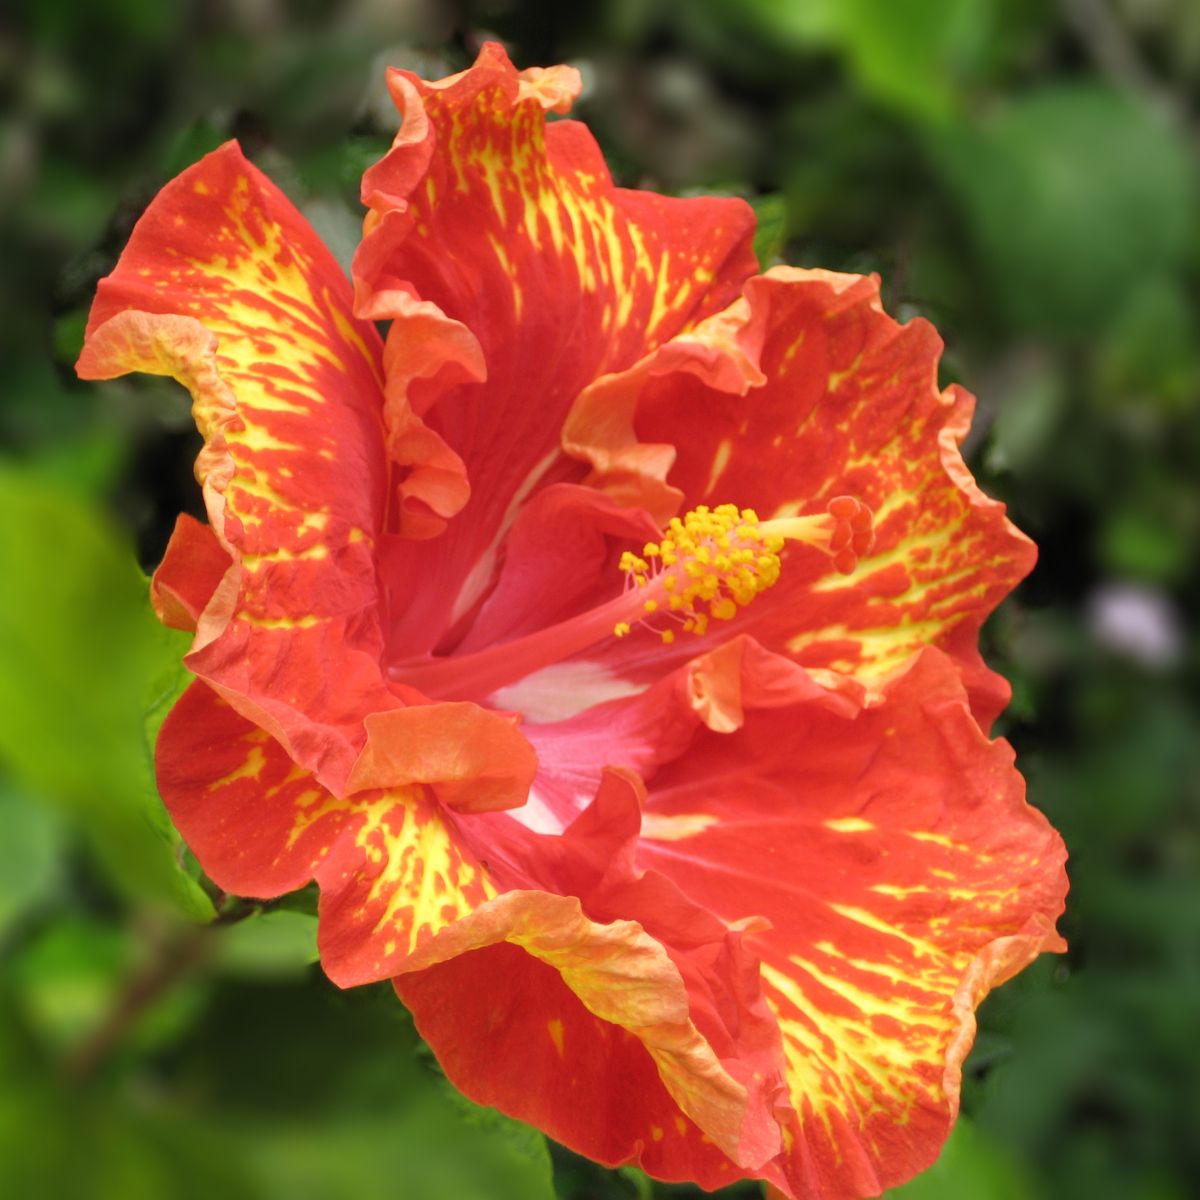 Beautiful red and yellow variegated flower.